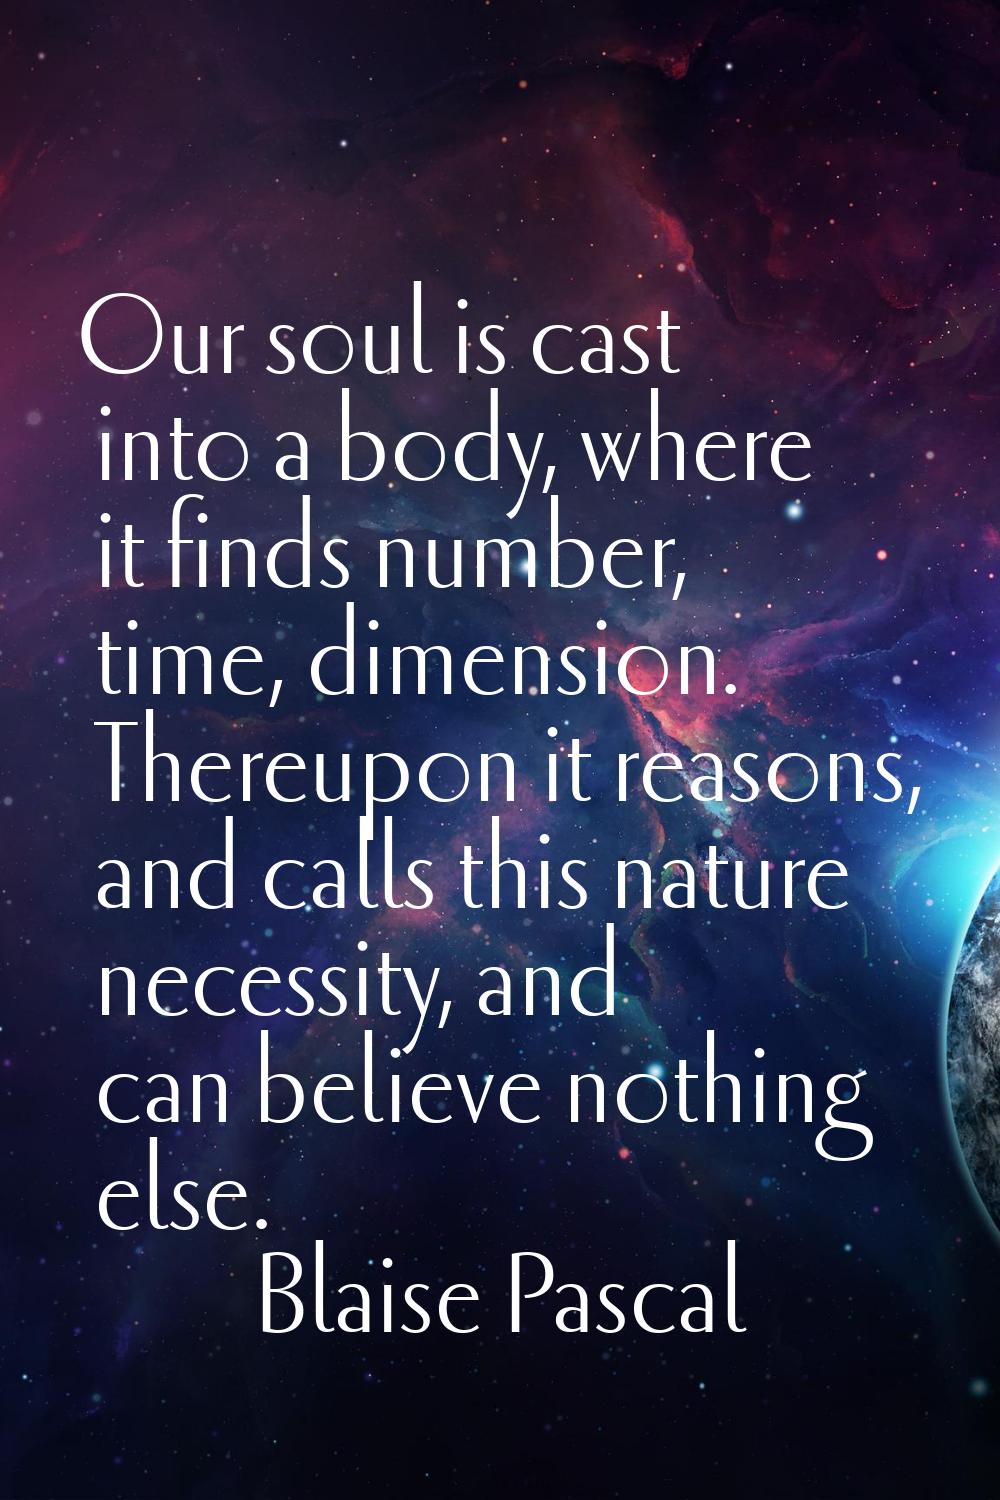 Our soul is cast into a body, where it finds number, time, dimension. Thereupon it reasons, and cal